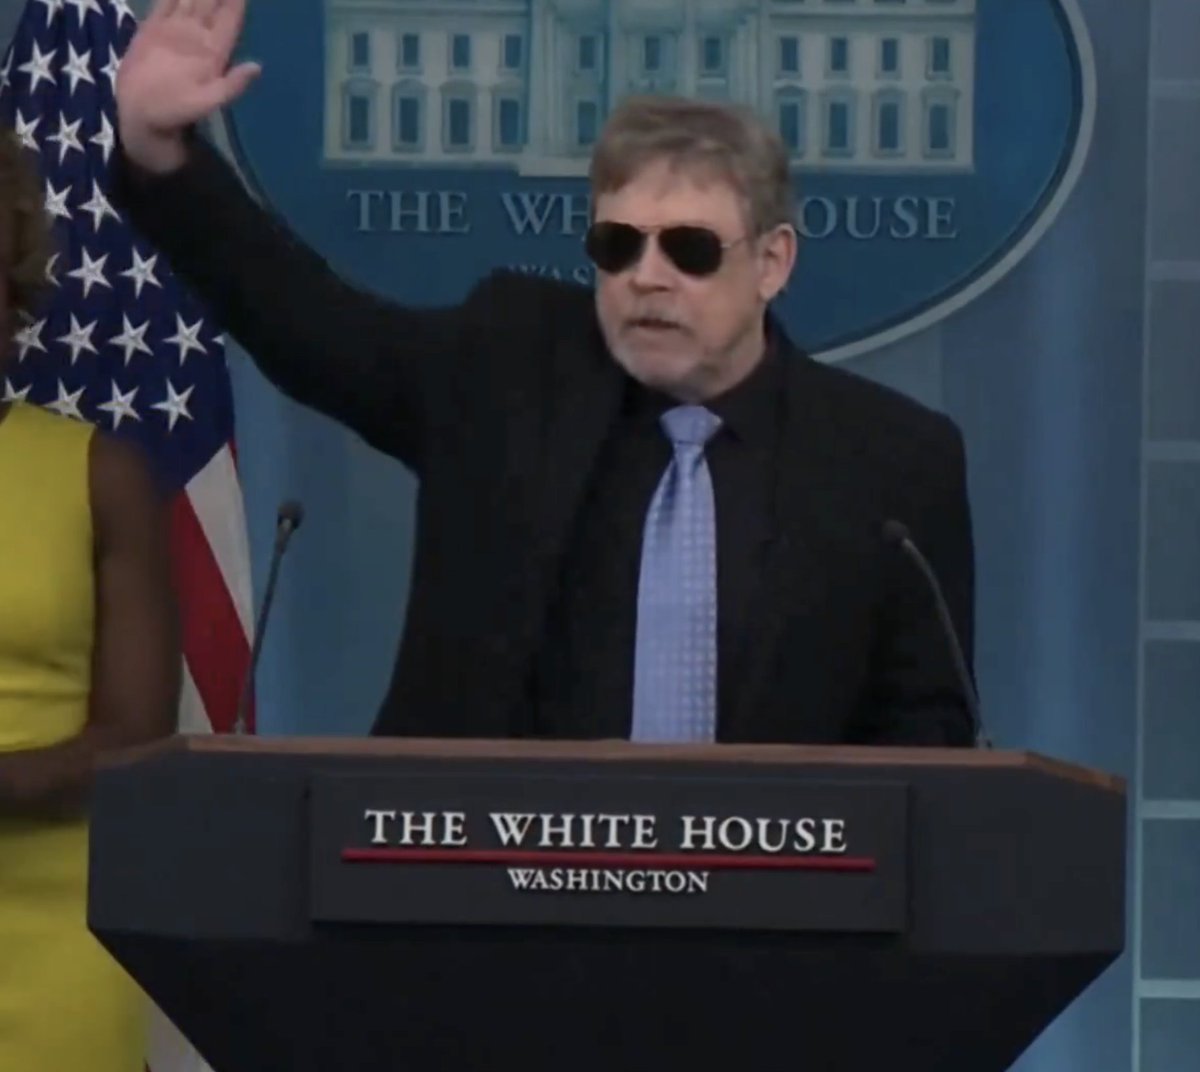 BREAKING: Legendary actor Mark Hamill infuriates MAGA world by making a surprise appearance at the White House press briefing to praise Joe Biden's historic presidency. Luke Skywalker is all in on defeating Donald Trump... 'How many of you had Mark Hamill will lead the press…